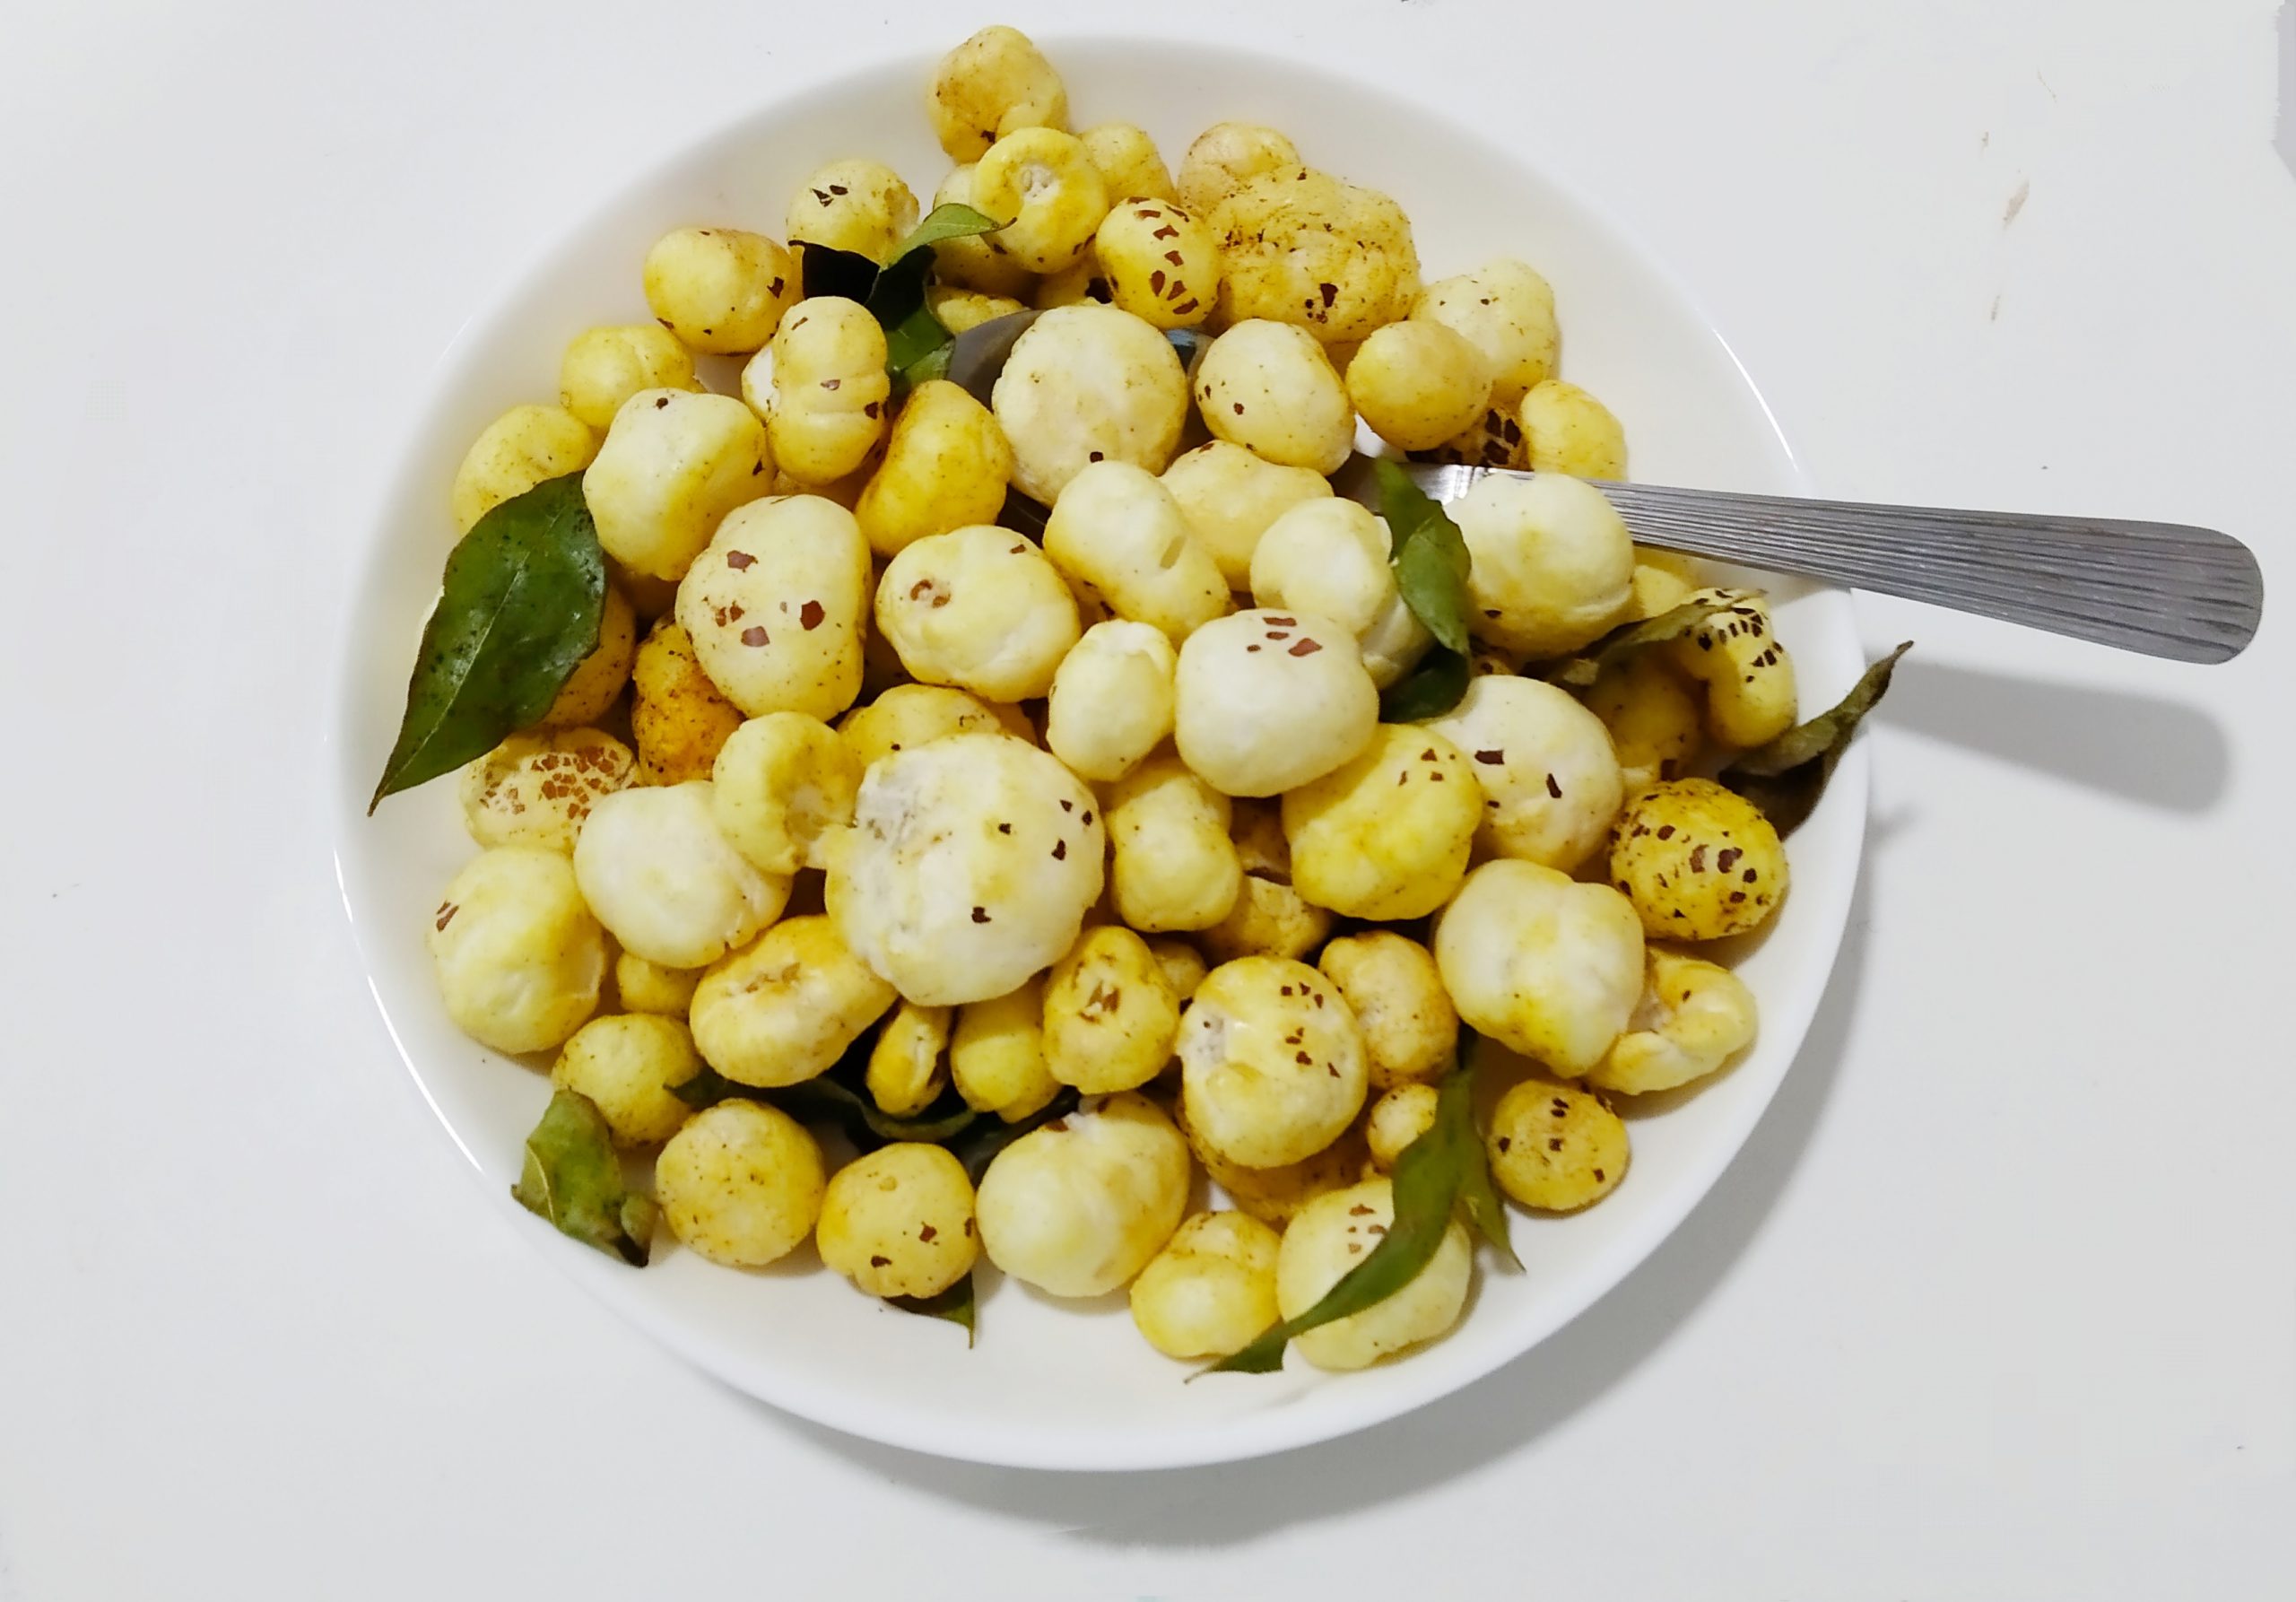 Lotus seed snack recipe with simple masala